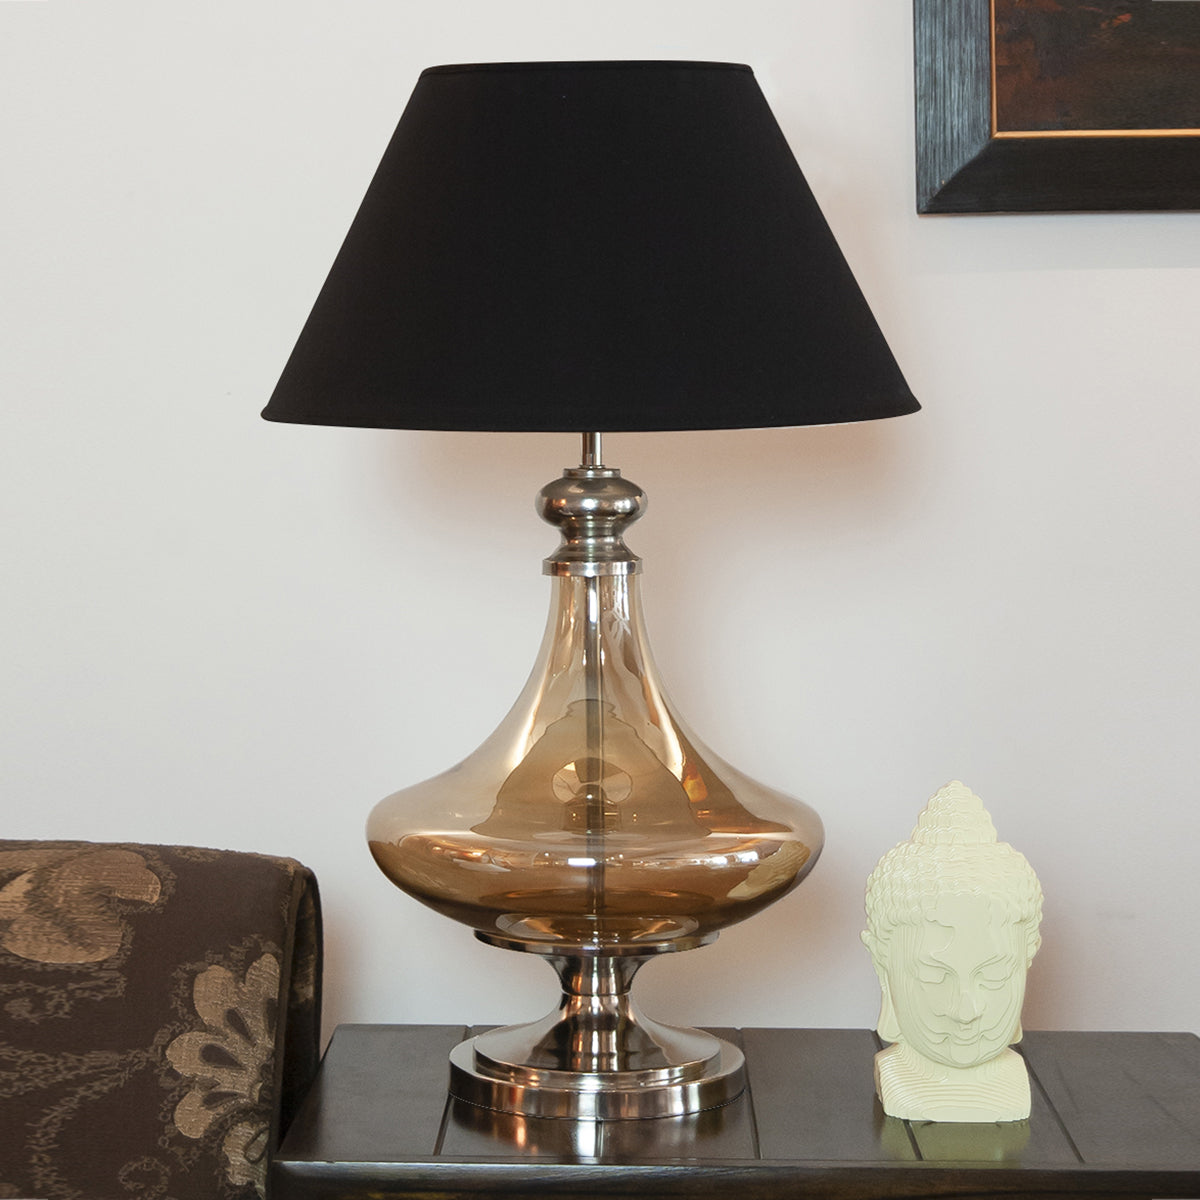  Detec Delicea Gold Luster Metal & Glass Table Lamp